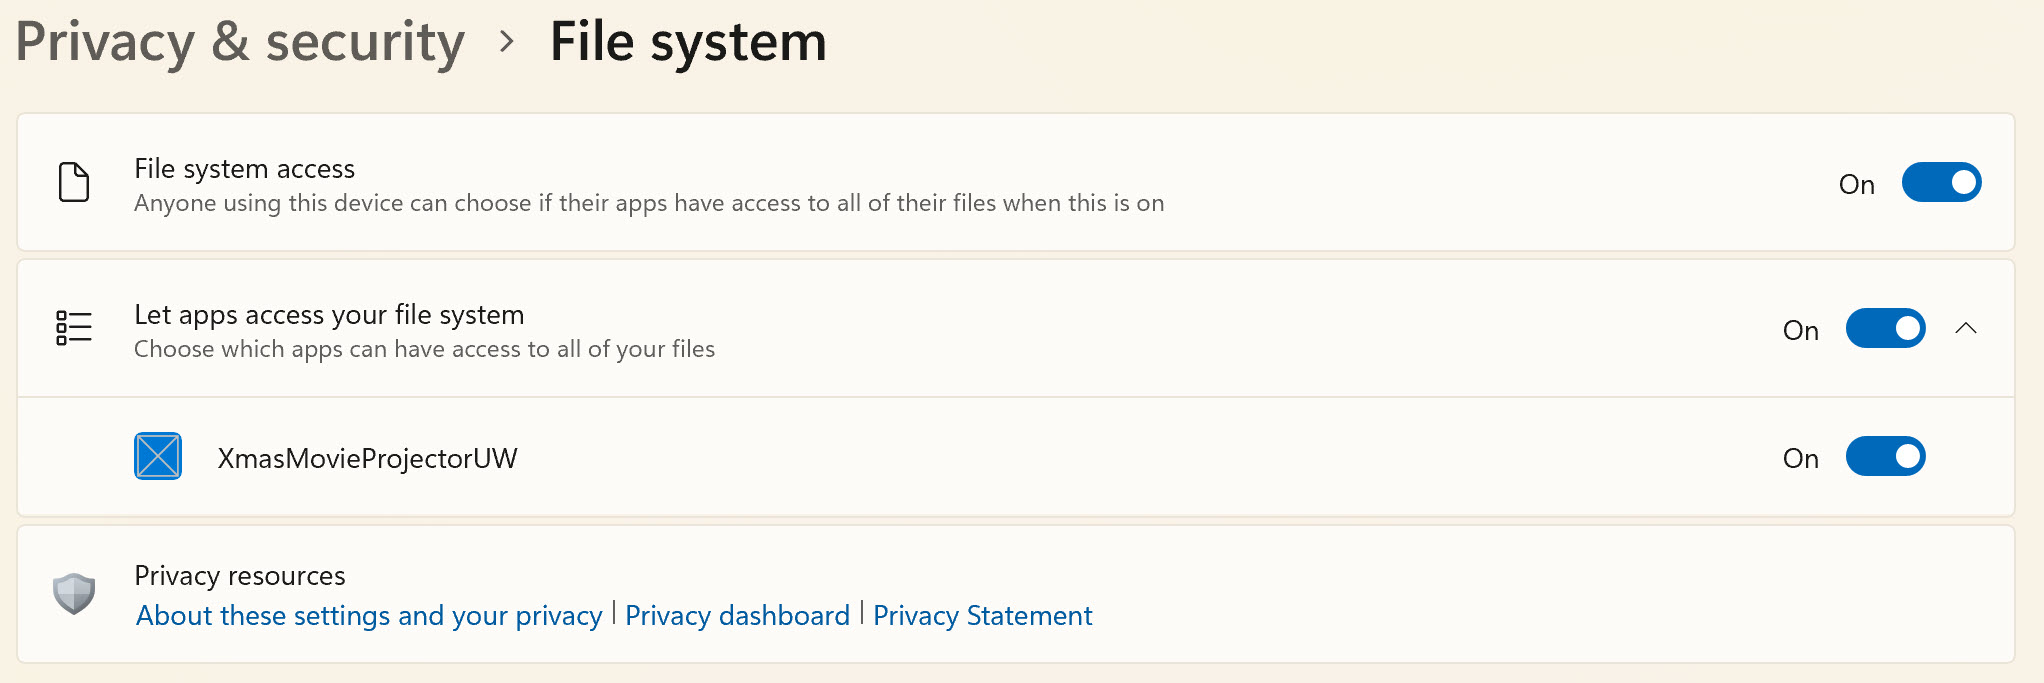 Privacy & Security > File system Settings